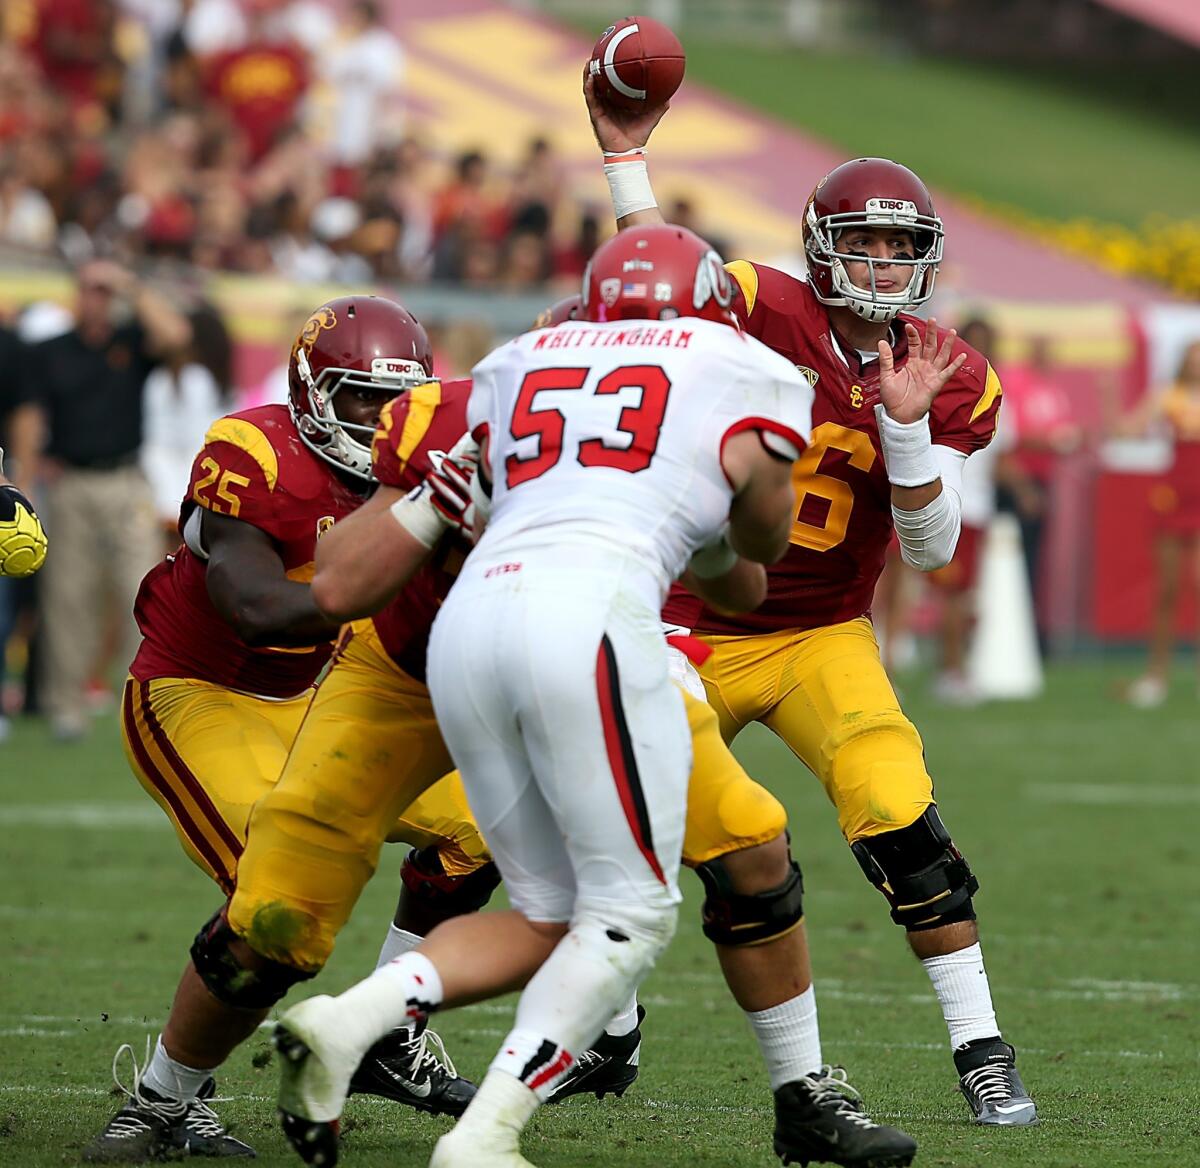 USC quarterback Cody Kessler is protected by his offensive line as he makes a pass during a 19-3 win over Utah.